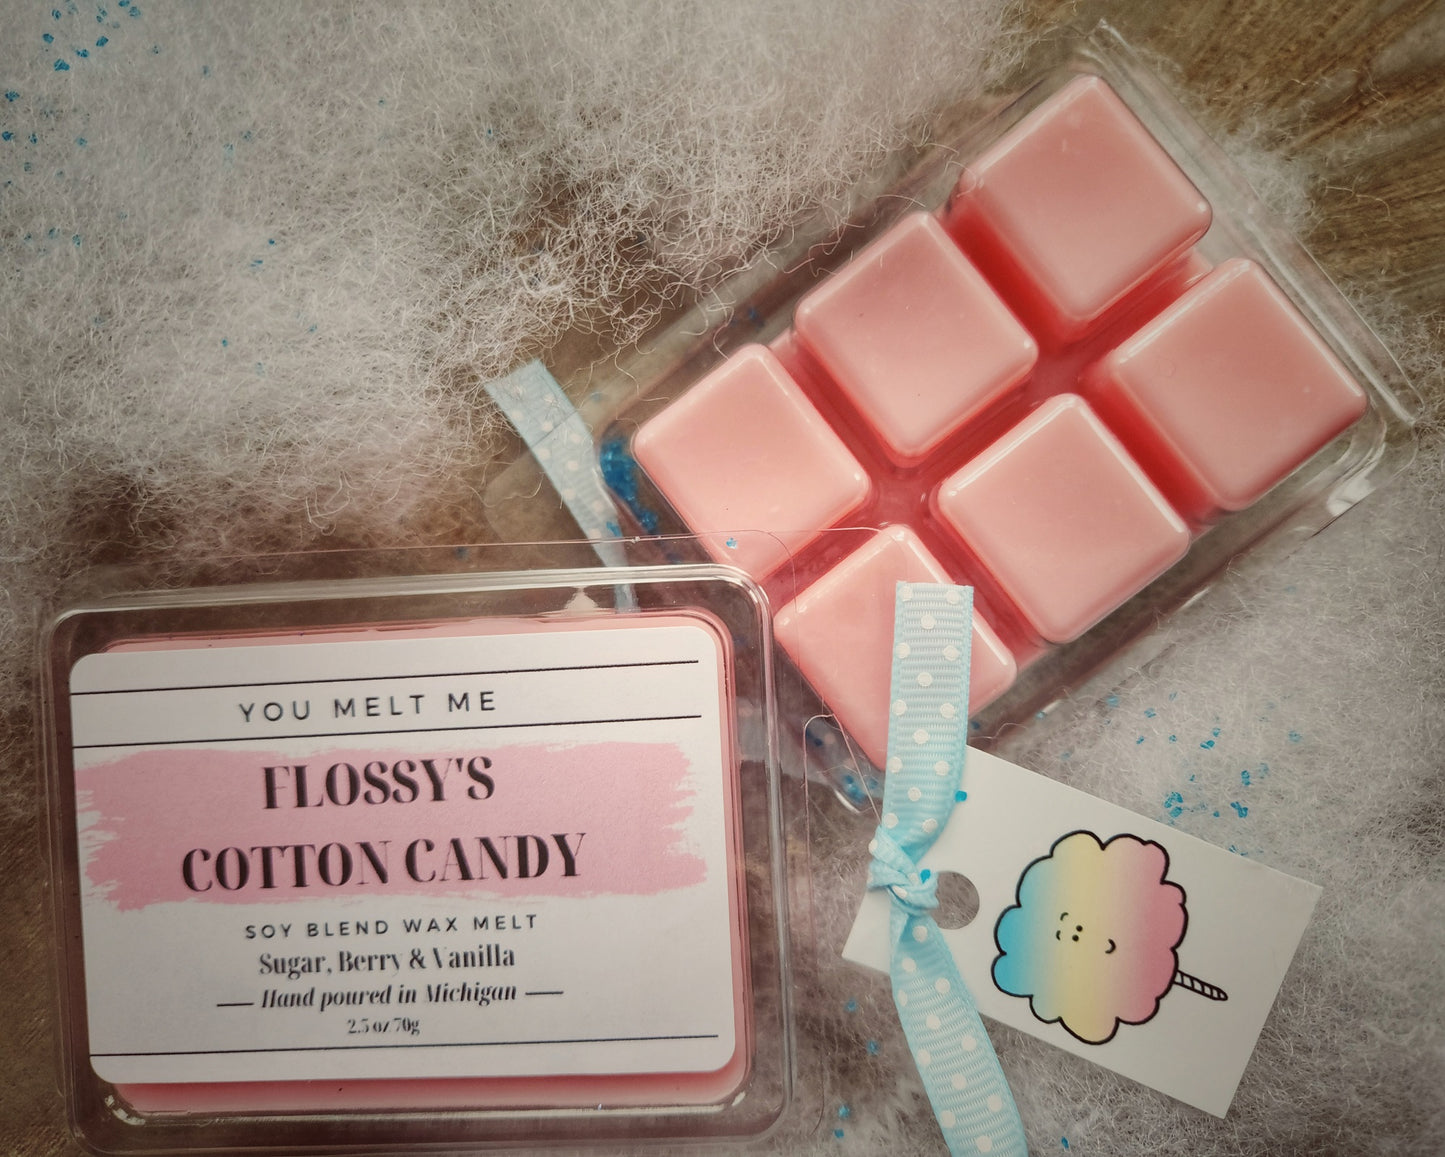 Flossy's Cotton Candy